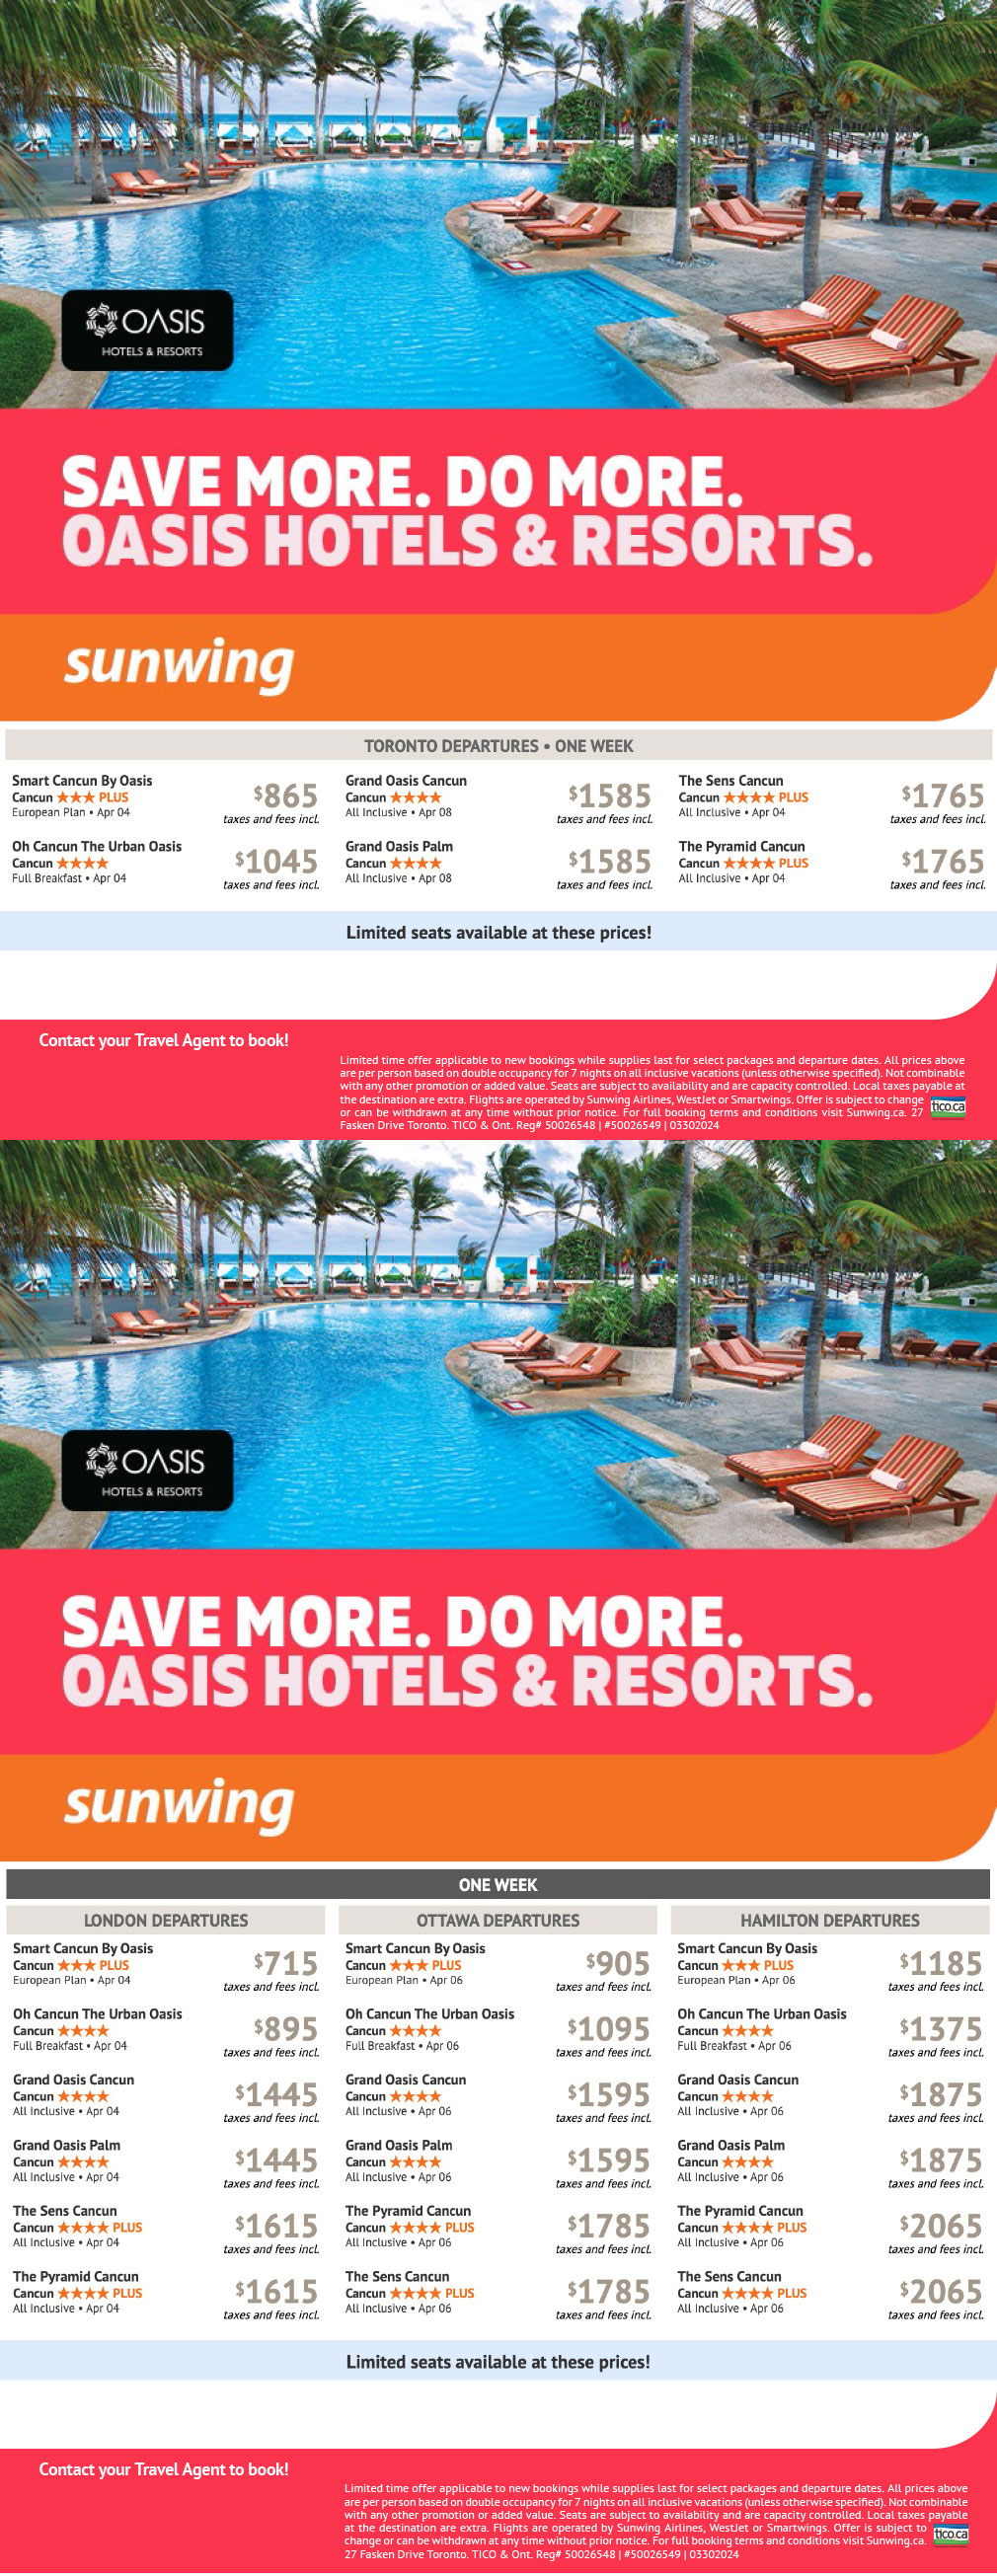 Save More. Do More. Oasis Hotels & Resorts